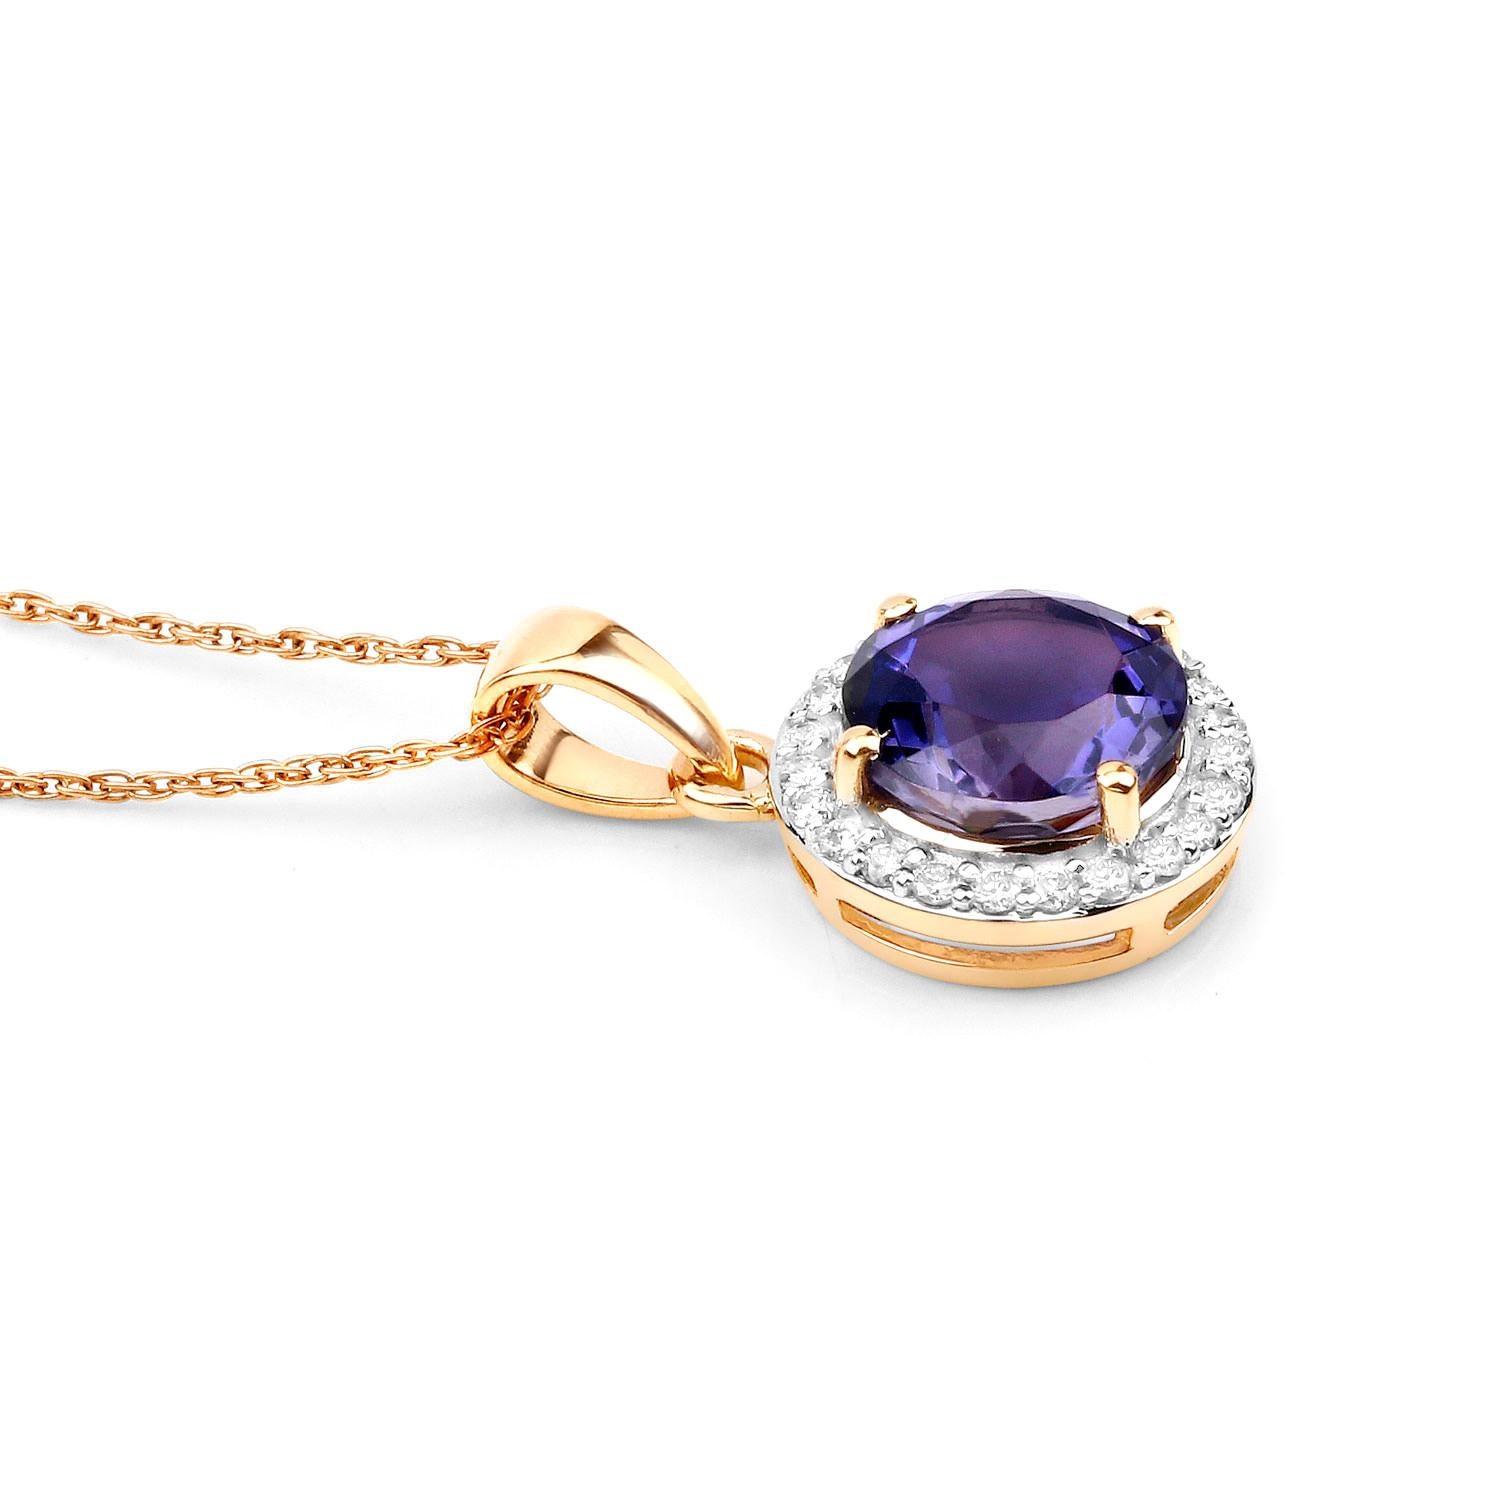 Iolite Pendant Necklace With Diamonds 1.71 Carats 14K Yellow Gold In Excellent Condition For Sale In Laguna Niguel, CA